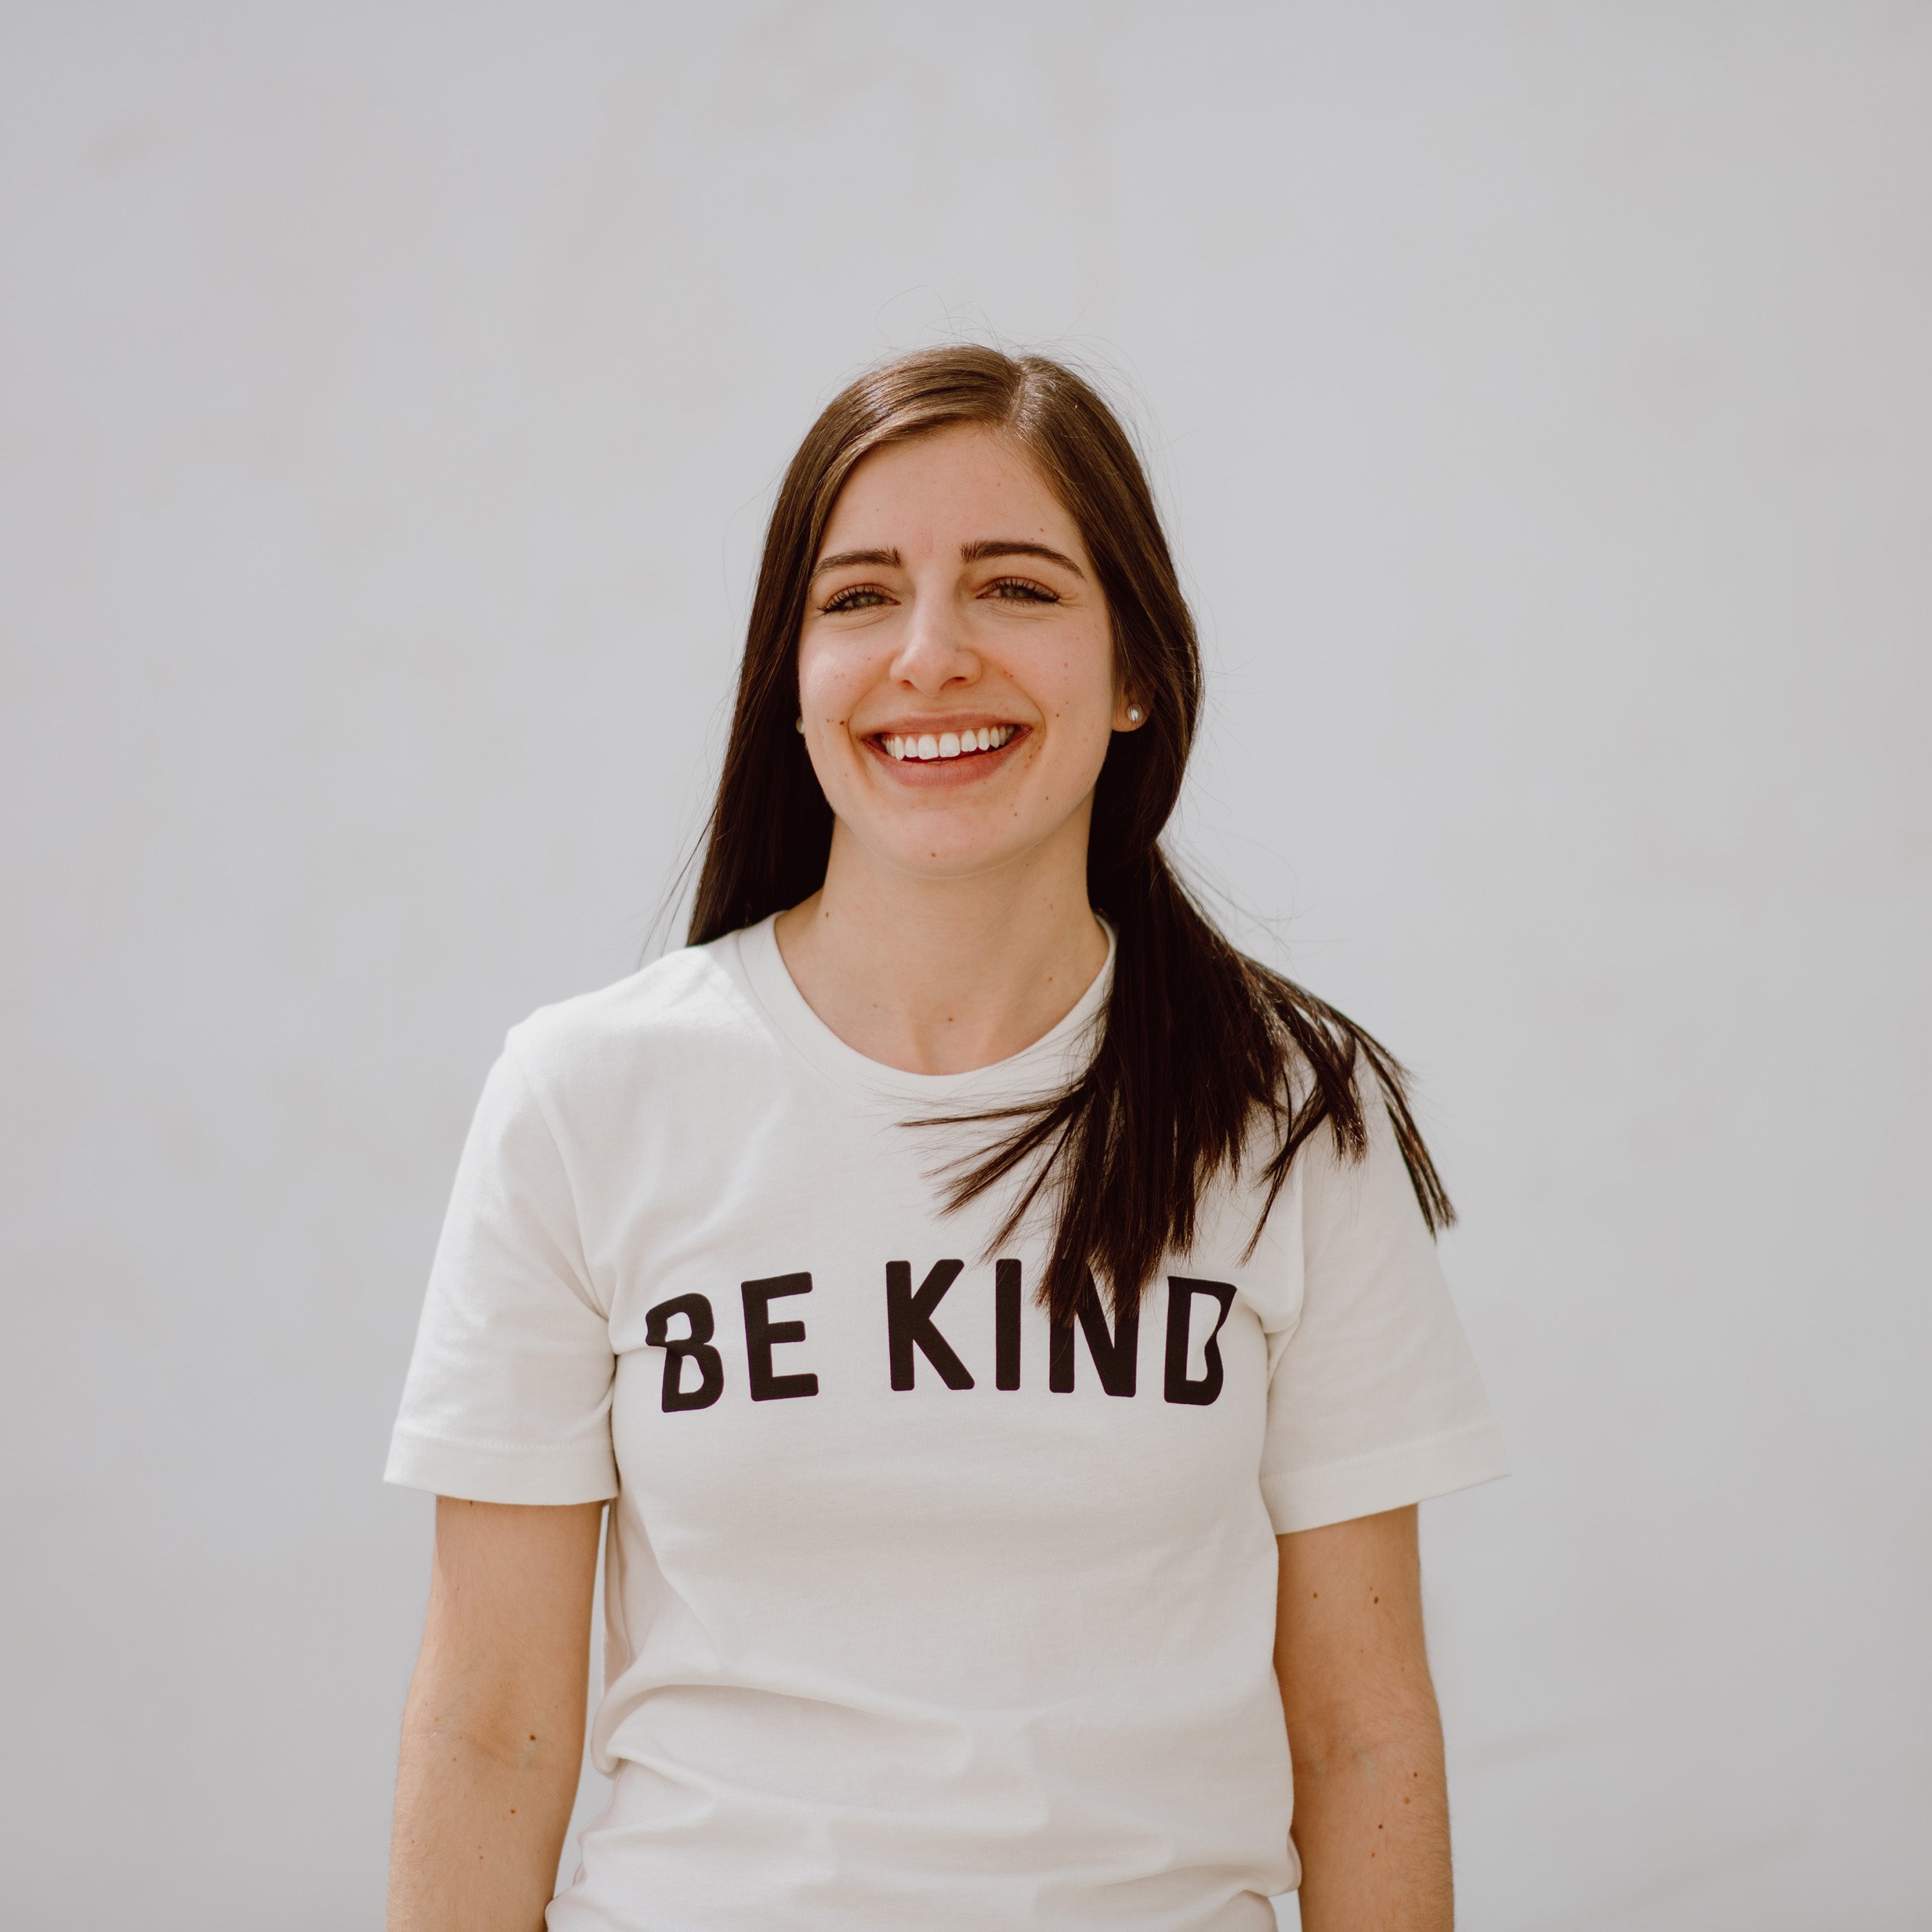 Be Kind Tee womens August Ink 